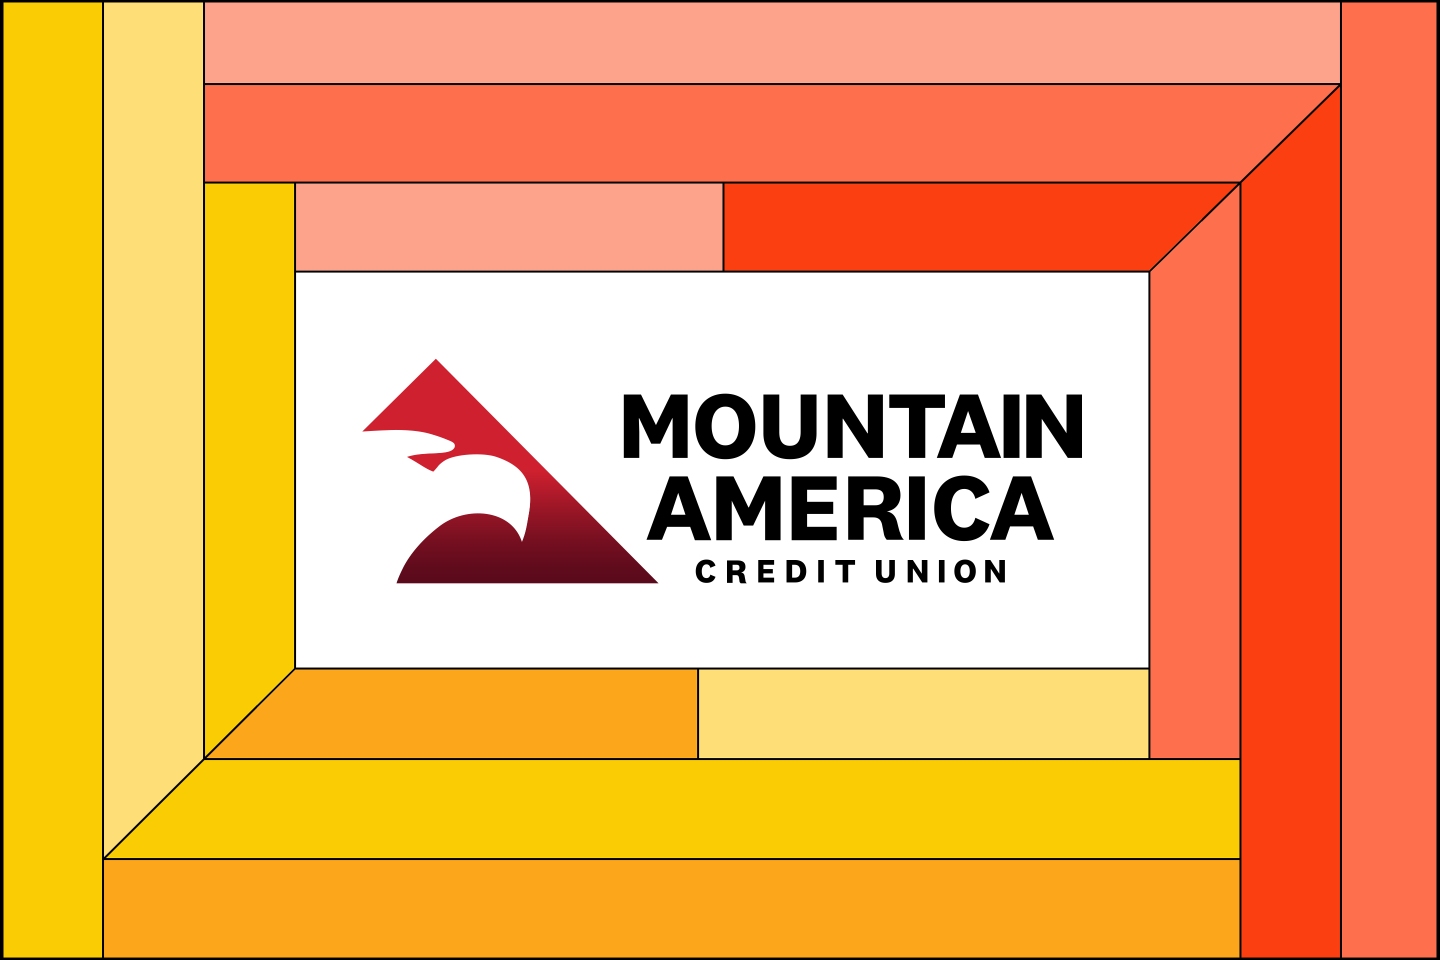 Illustration of the Mountain America Credit Union logo surrounded by a yellow and red frame.